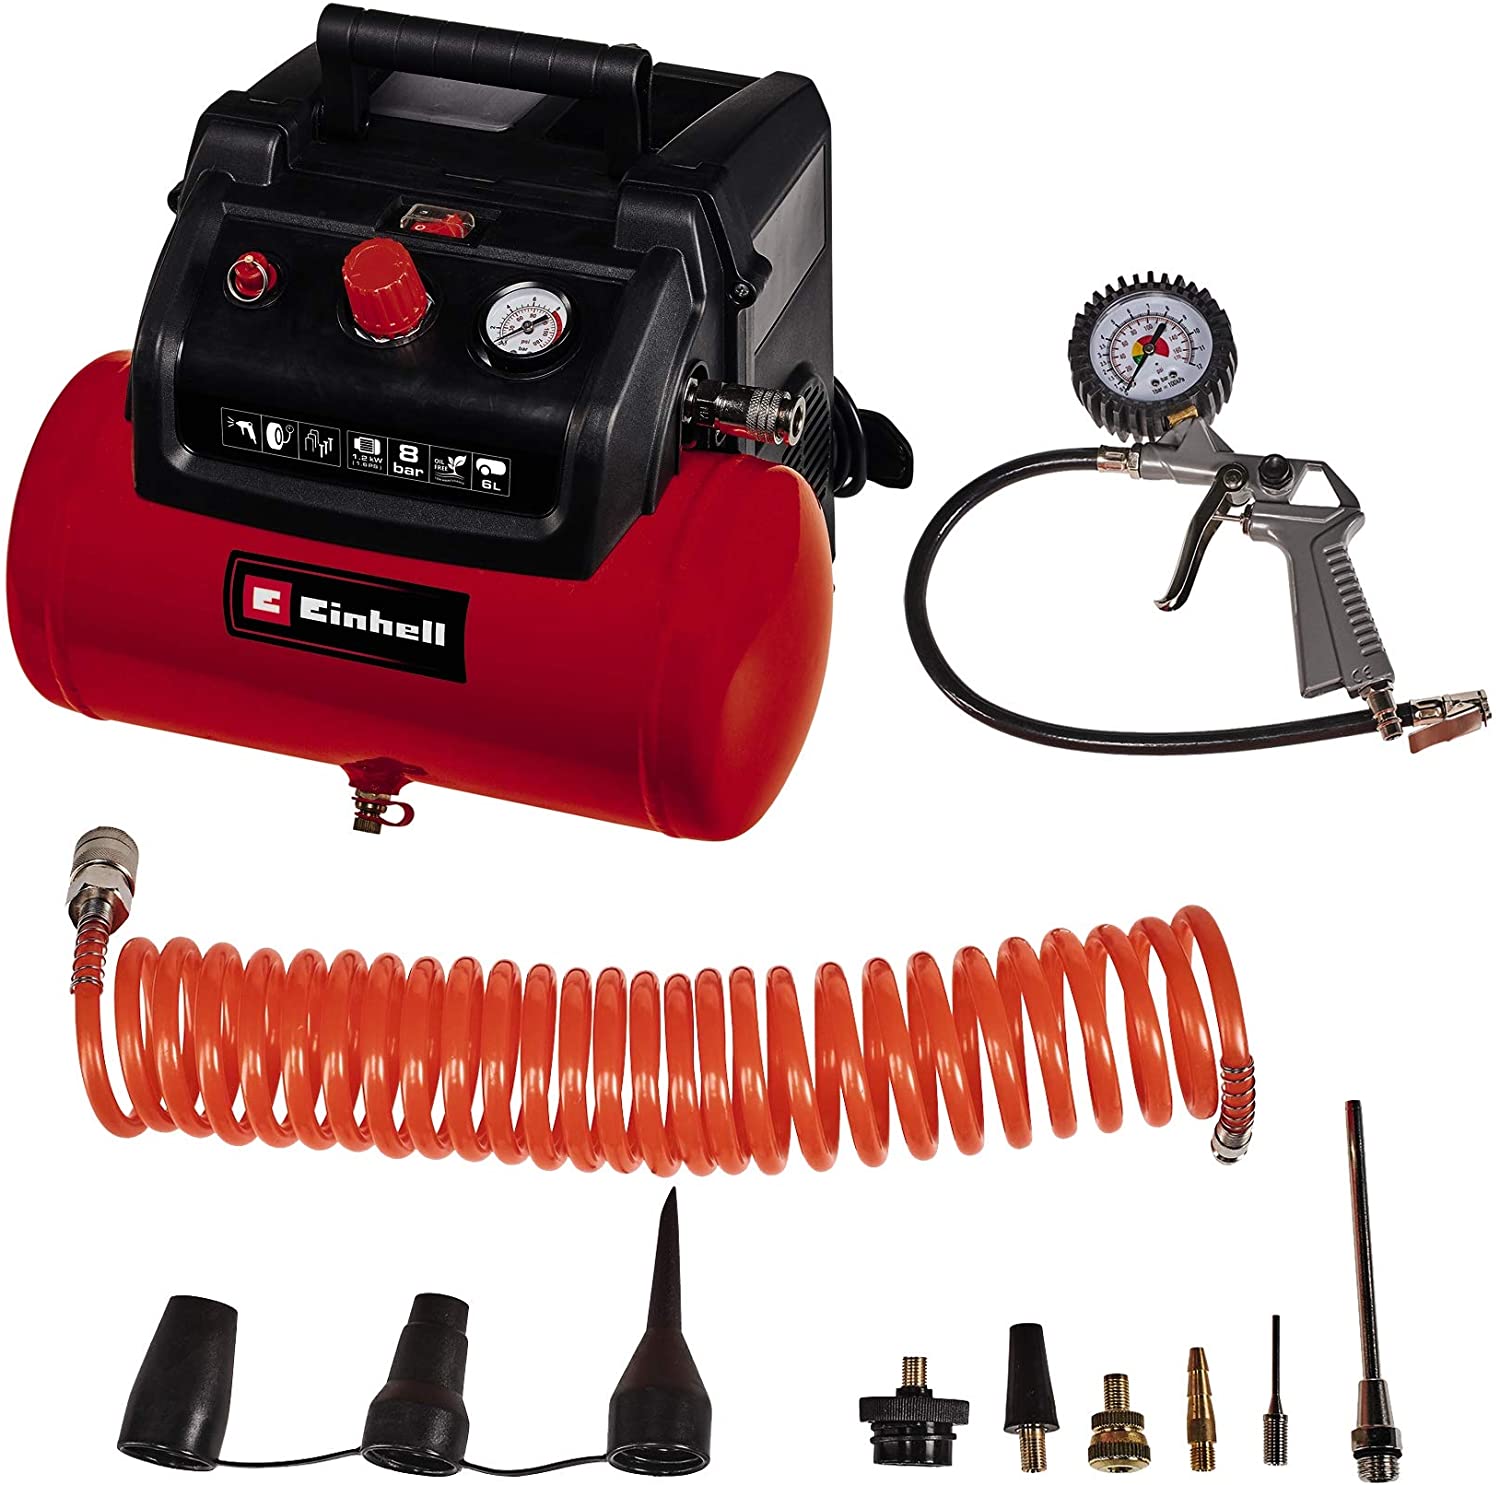 Einhell Compressor TC-AC 190/6/8 OF Set (red/black, 1,200 watts, tire inflator, compressed air hose) 4020650 (4006825641578)